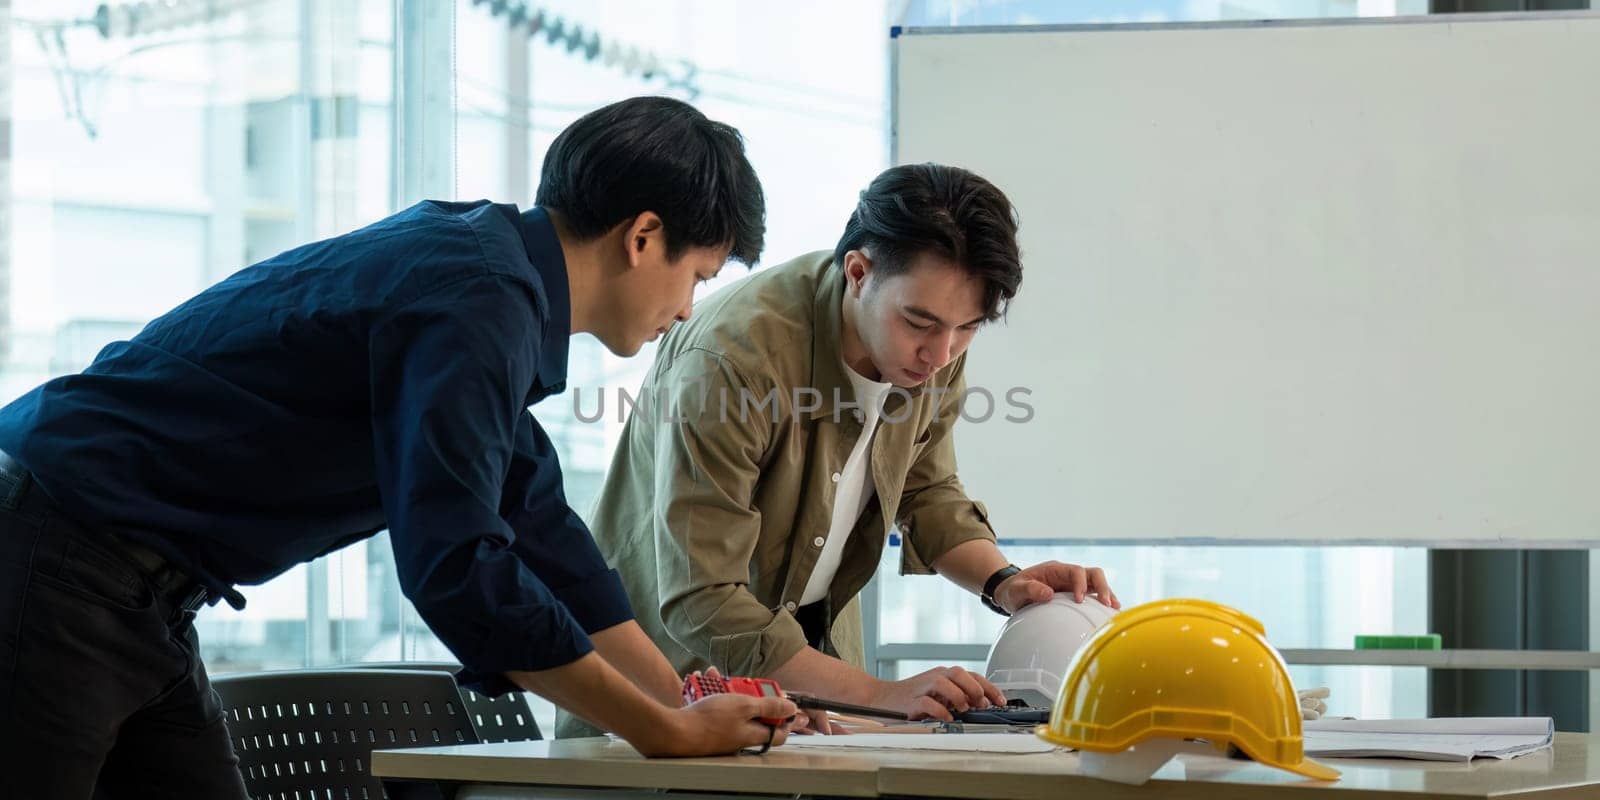 Construction and structure of engineer or architect meeting for project working with partner and tools on model building and blueprint in working site.